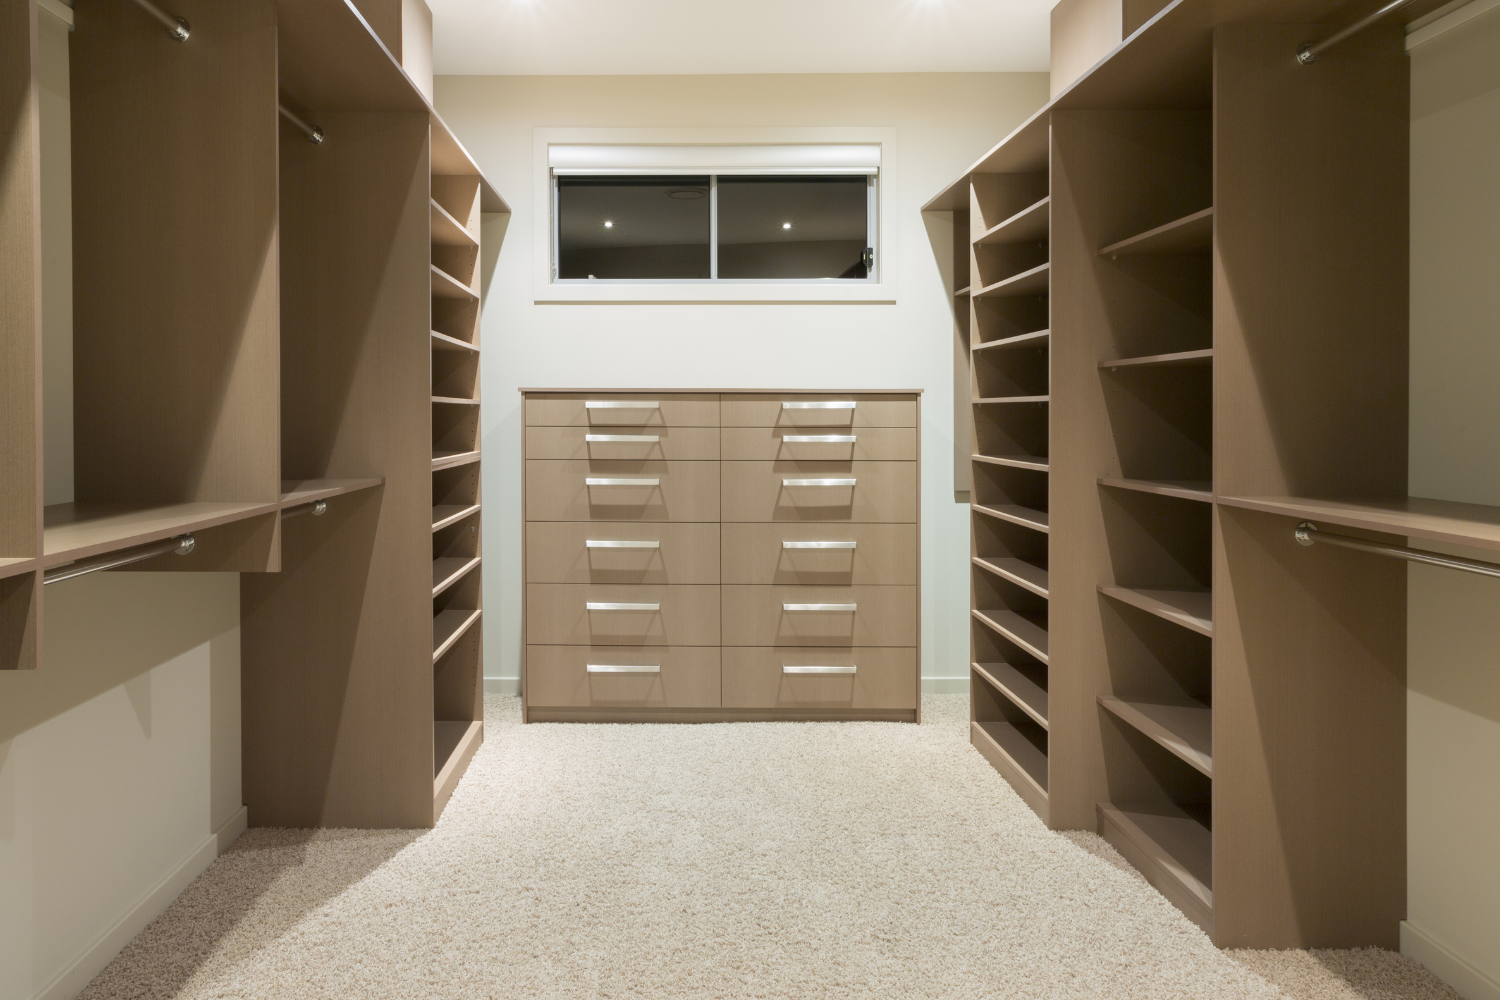 10 Best Closet Organization ideas to maximize space and style.